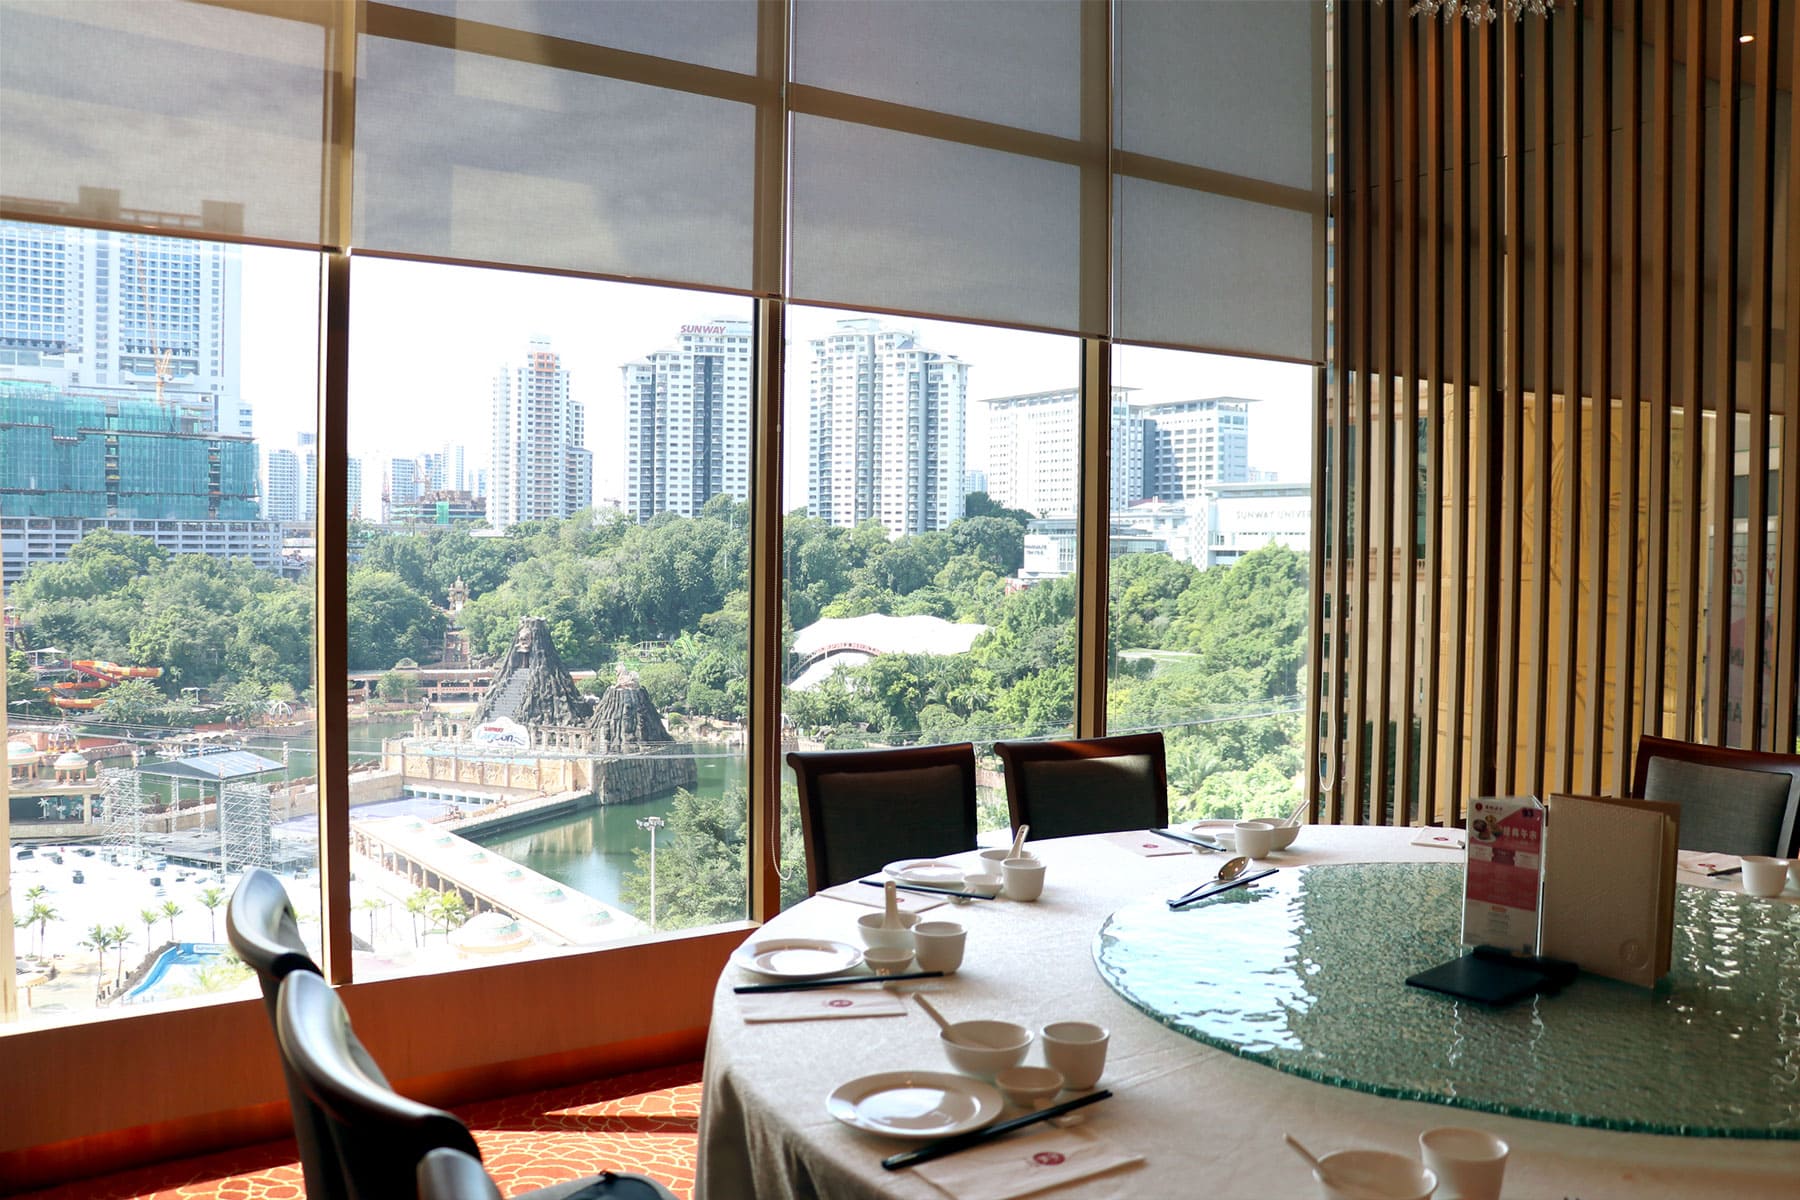 Oriental Sun - Admire the sights of Sunway Lagoon while you indulge in Cantonese house specialties.